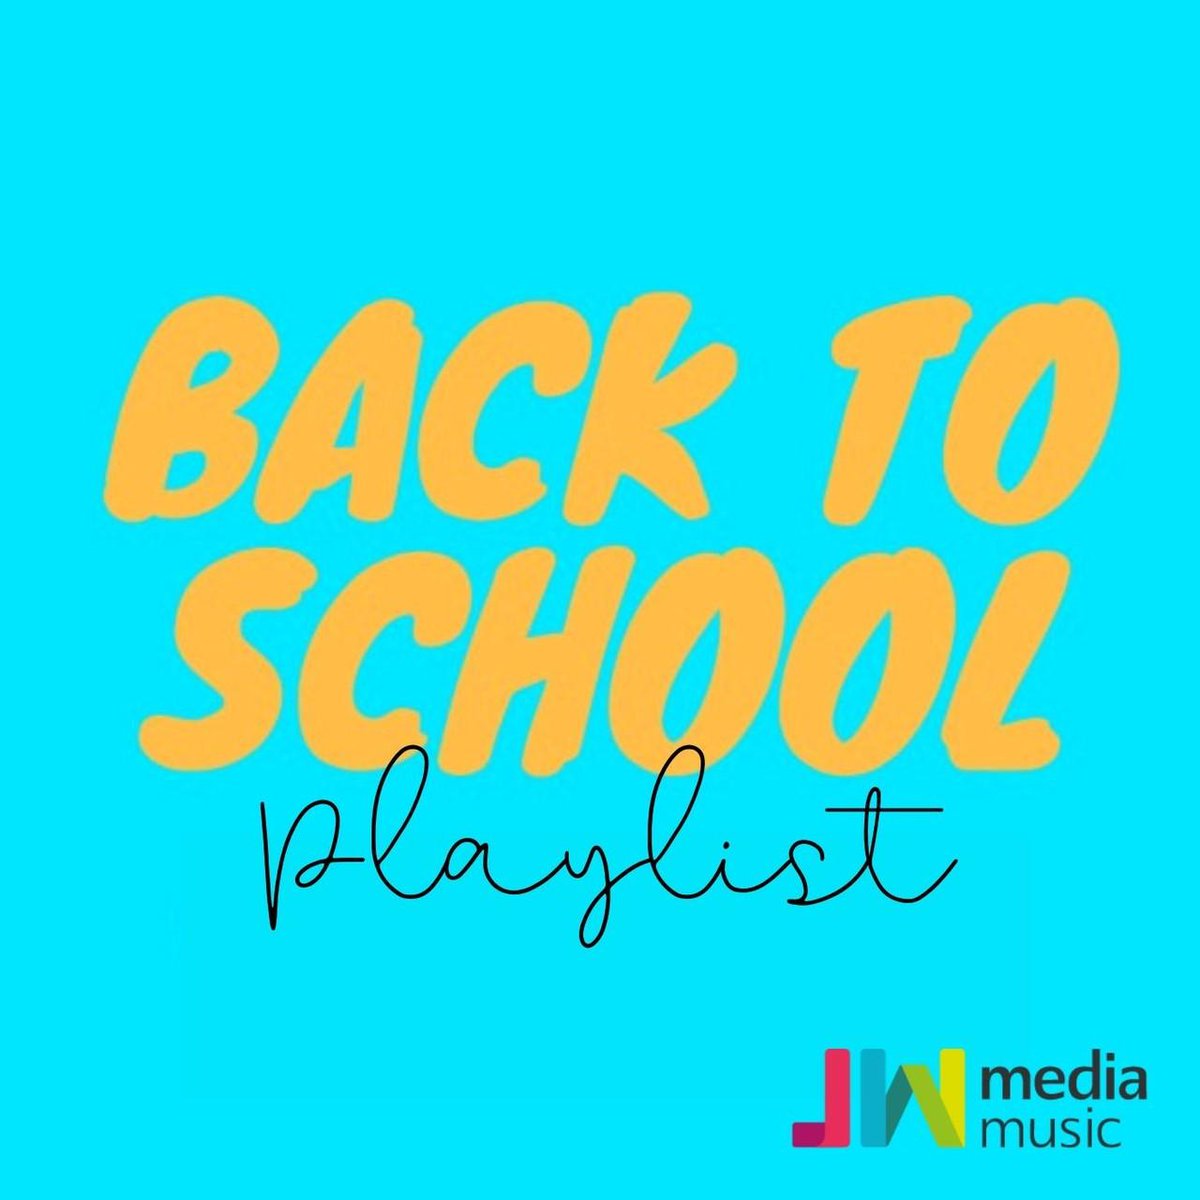 And they're back! Phewf. 😵
Now is the time to brush up on the bargains ruling the ad world! Here's a playlist that'll help you along...🔈bit.ly/2CrBJzz 
#ipc #sync #productionlife #advertising #marketing #musicforbroadcast #productionmusic #backtoschool #socialmedia